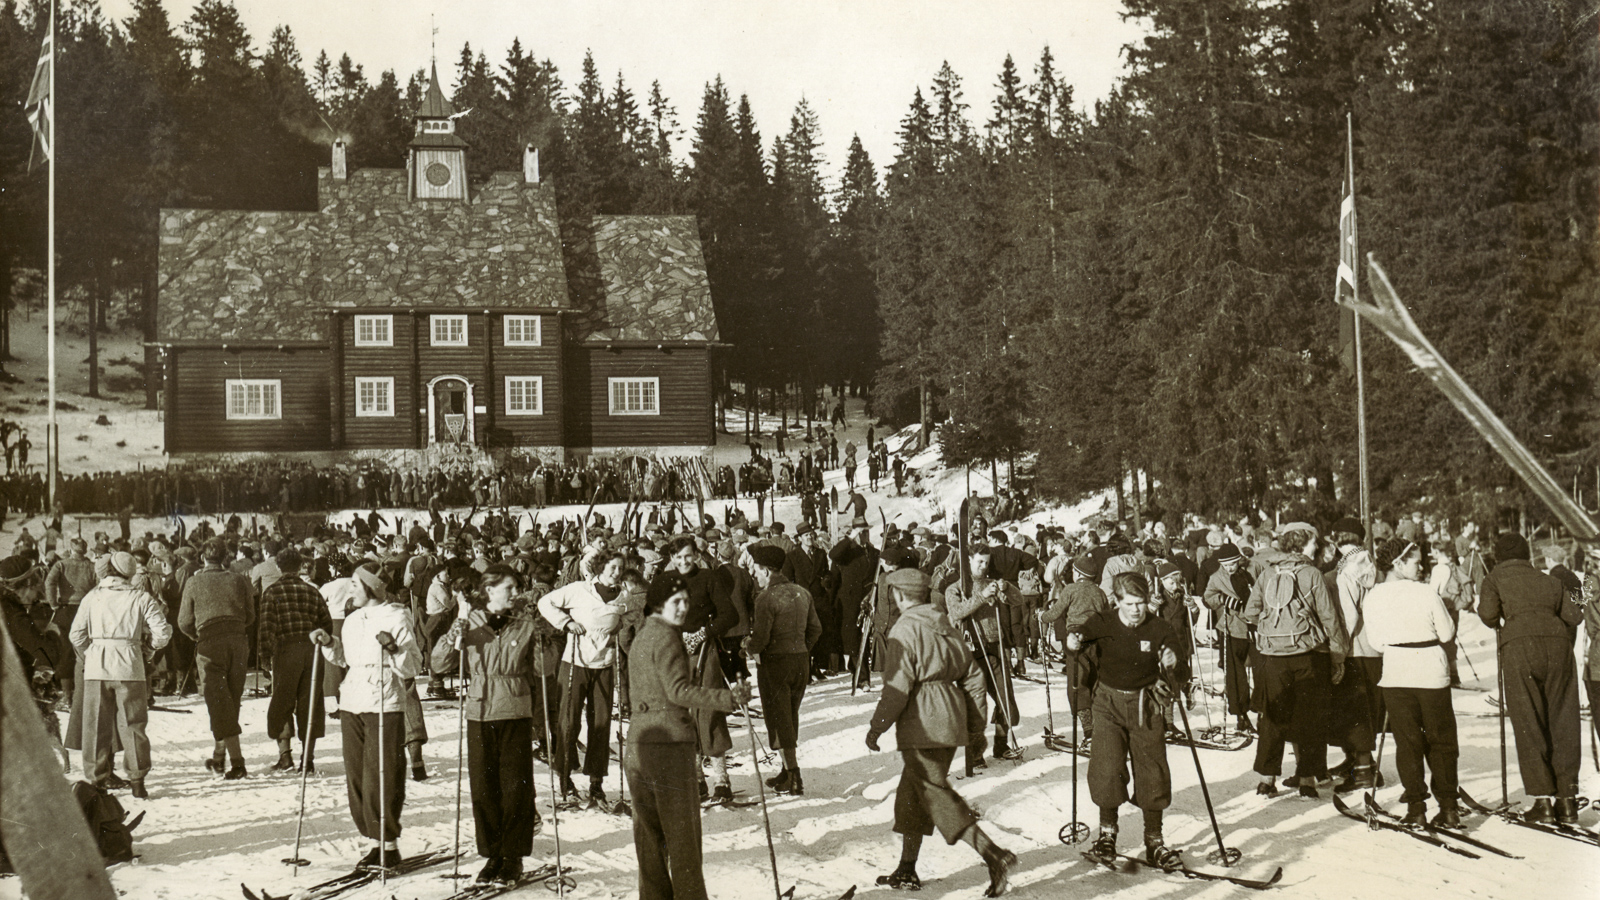 Large crowd of hikers in front of the Ski Museum at Frognerseteren in the 1920s